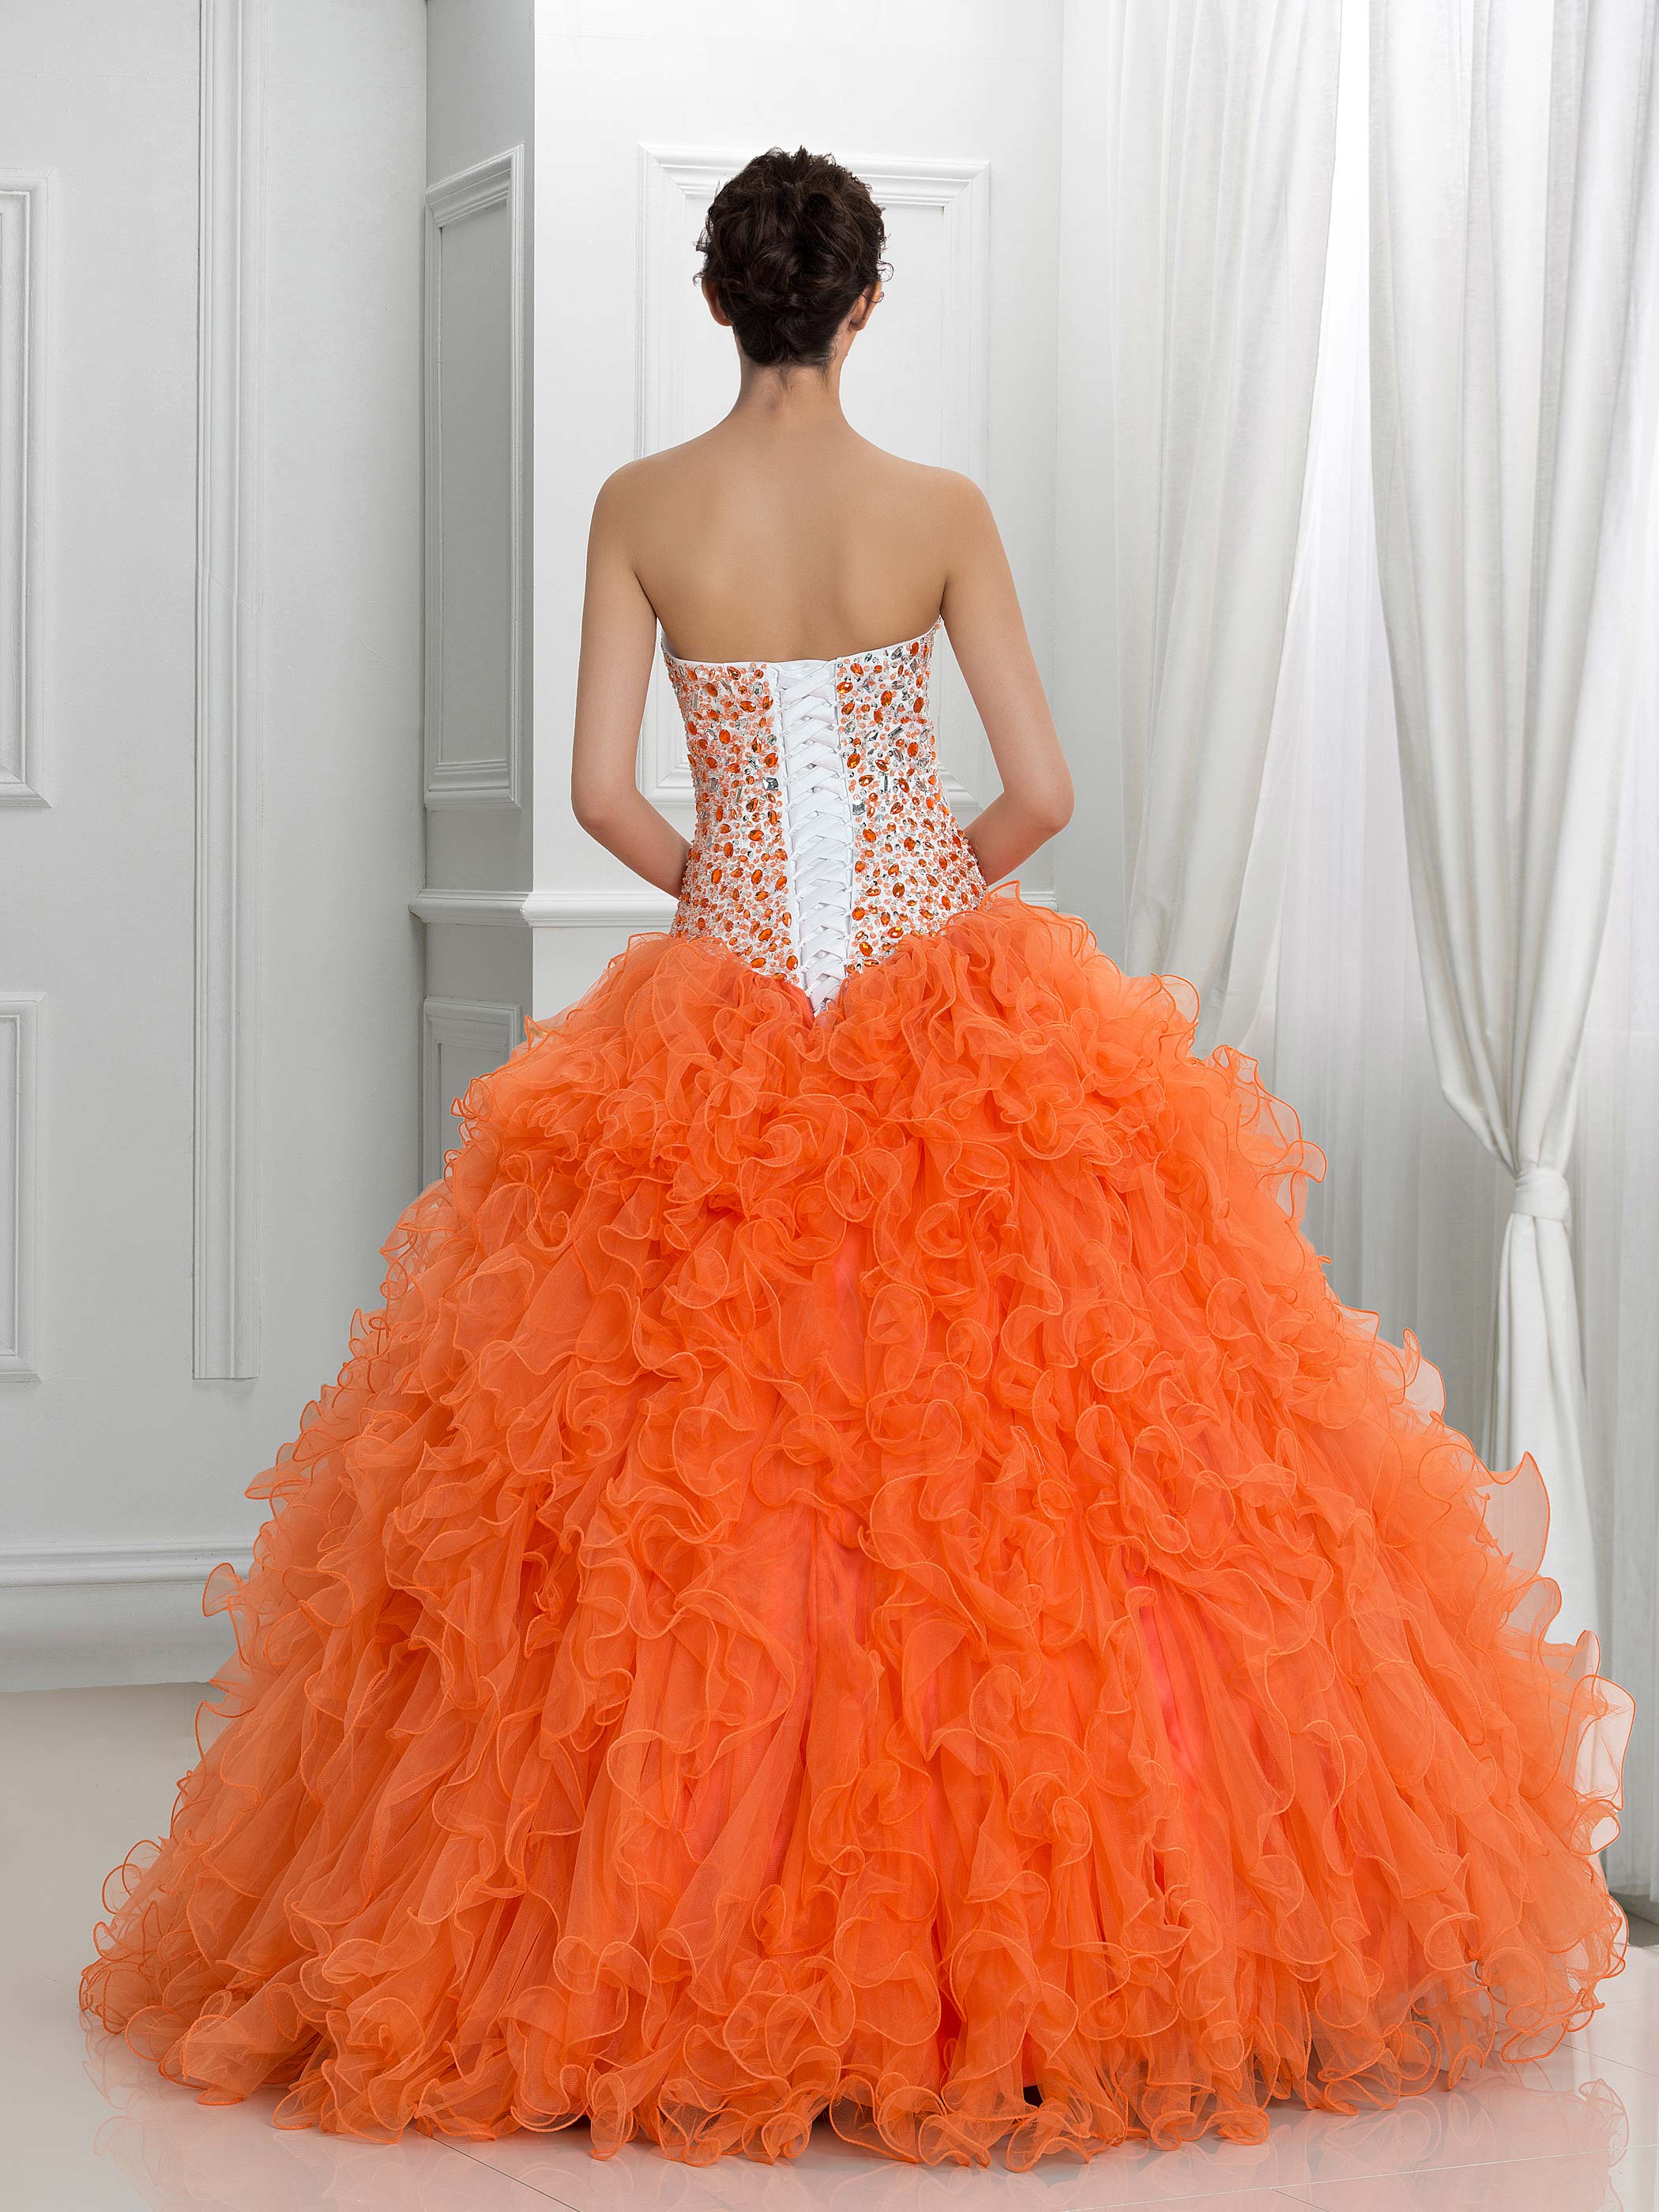 Ericdress Sweetheart Crystal Ruffles Ball Gown Quinceanera Dress With Jacket/Shawl